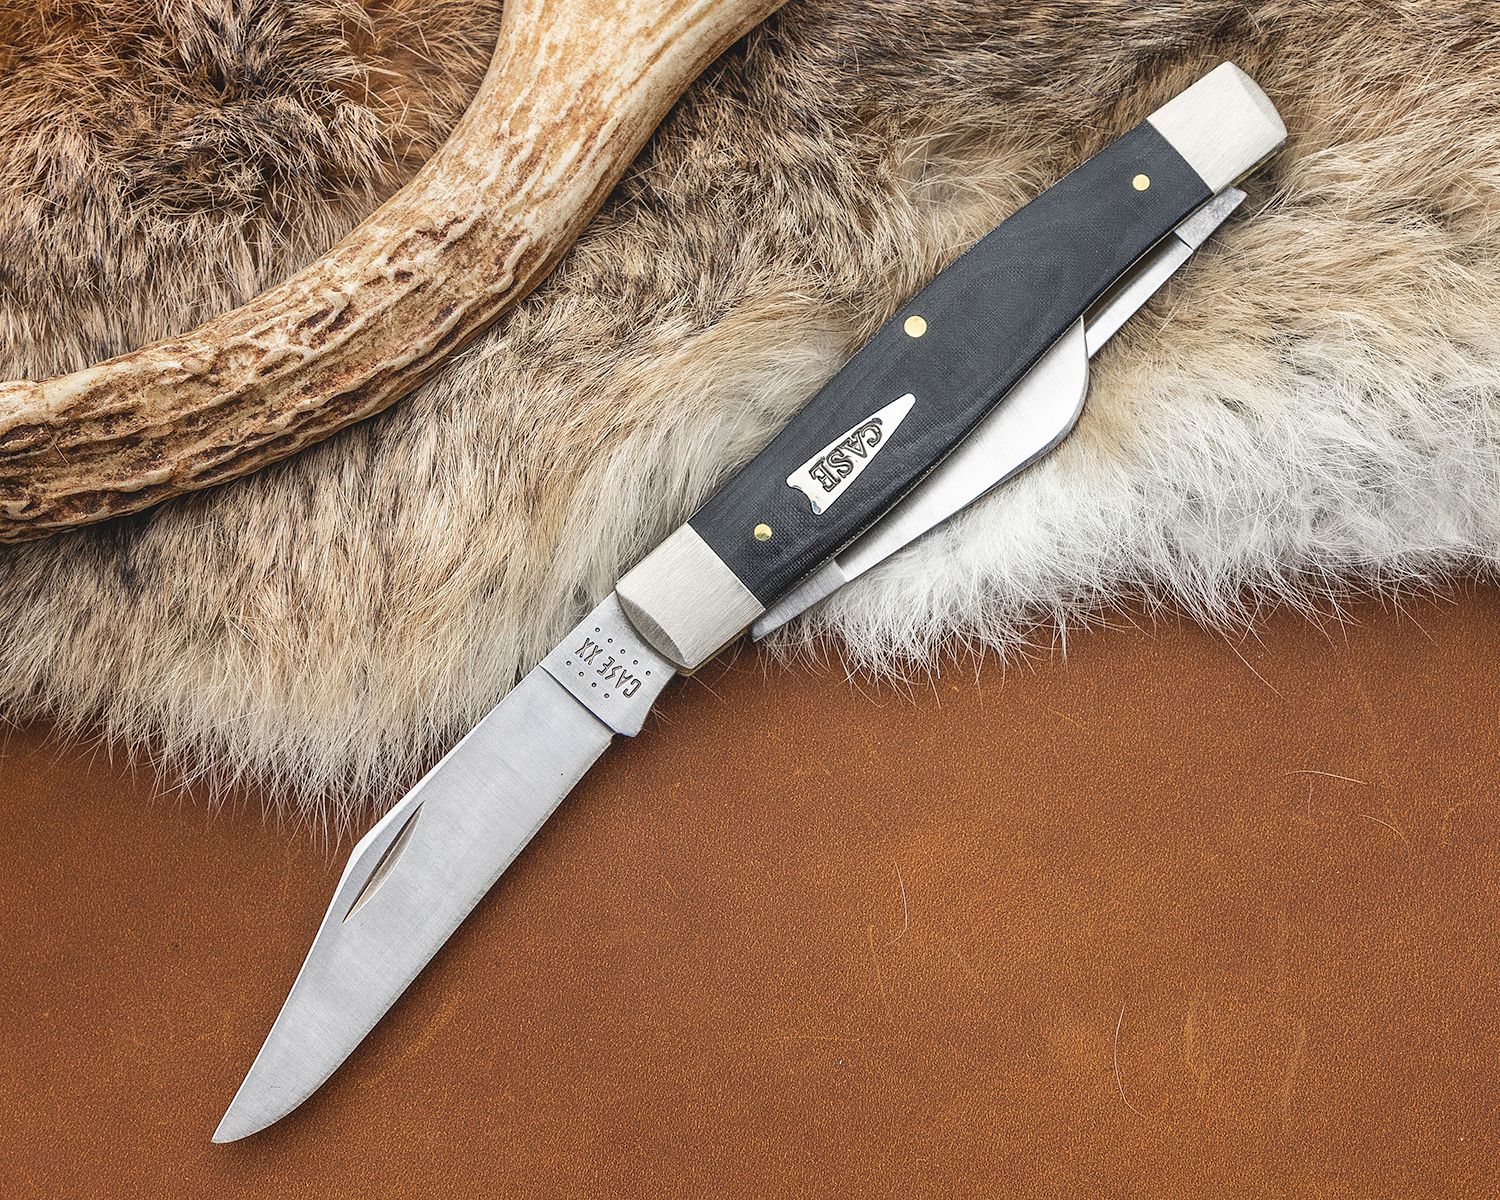  Case xx Smooth Black Micarta Large Stockman Stainless Pocket  Knife Knives : Tools & Home Improvement